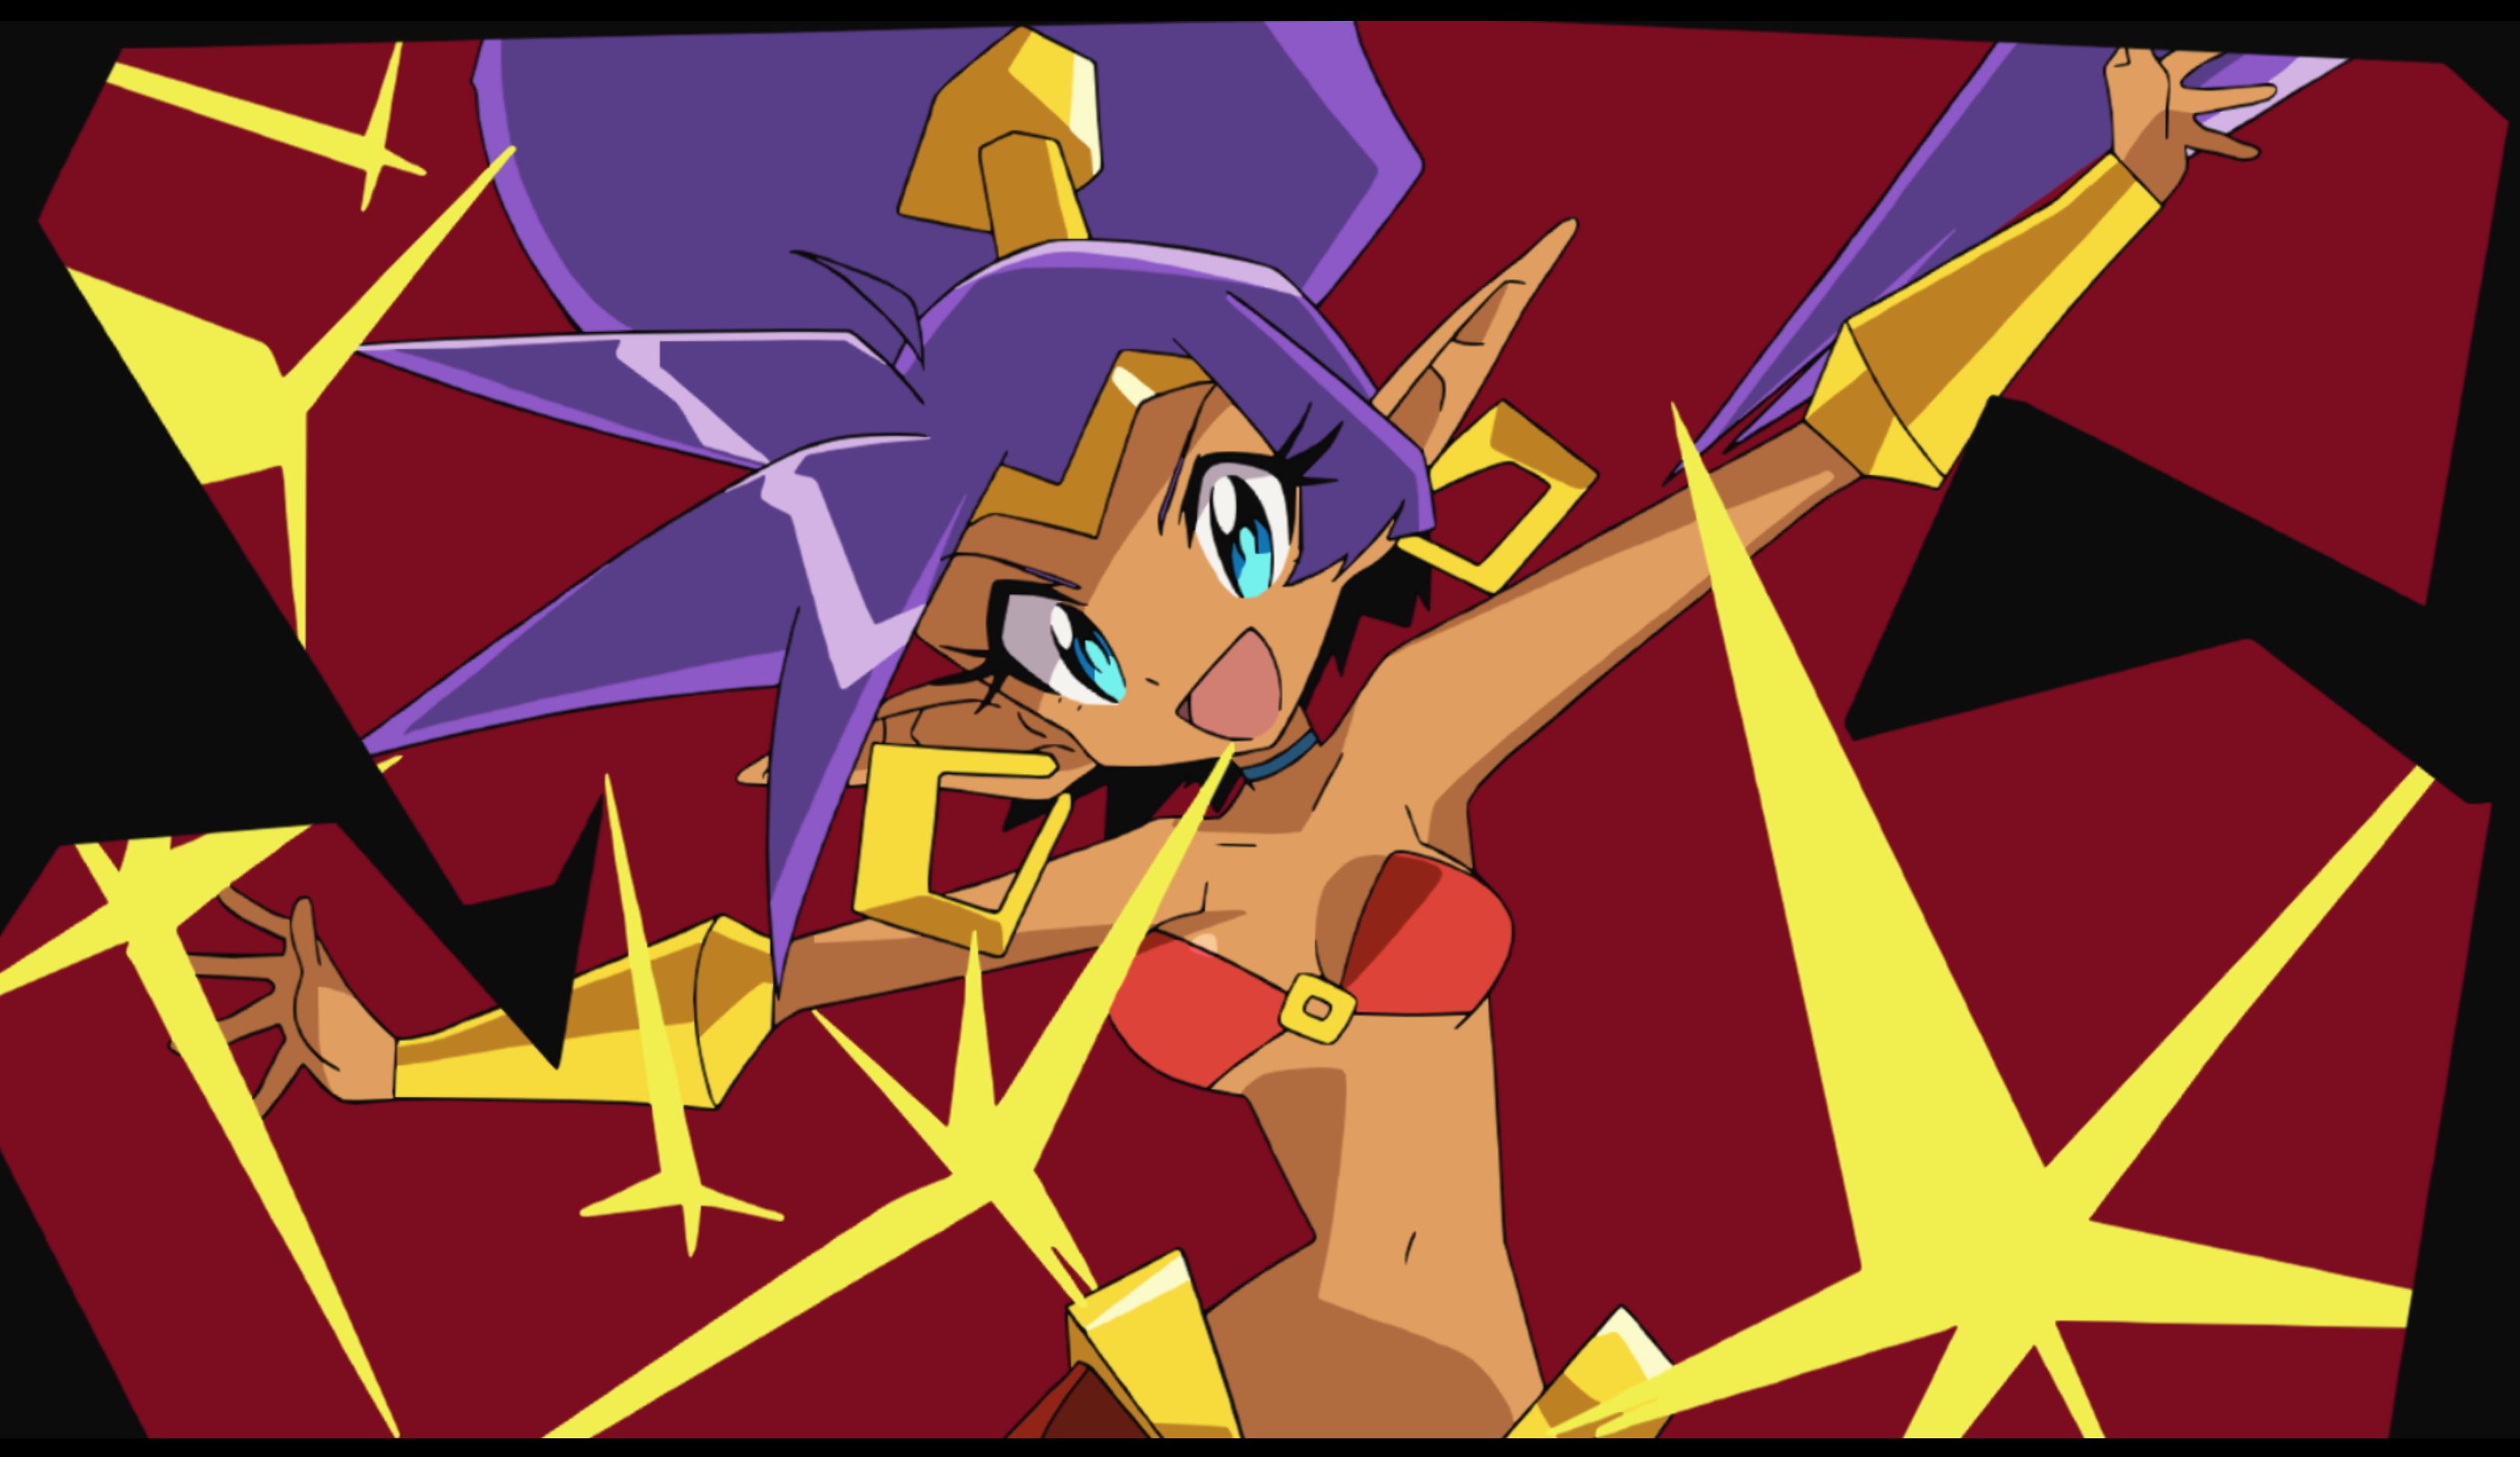 Shantae and the Seven Sirens won't have DLC, details on the Japanese/Asian release being worked on